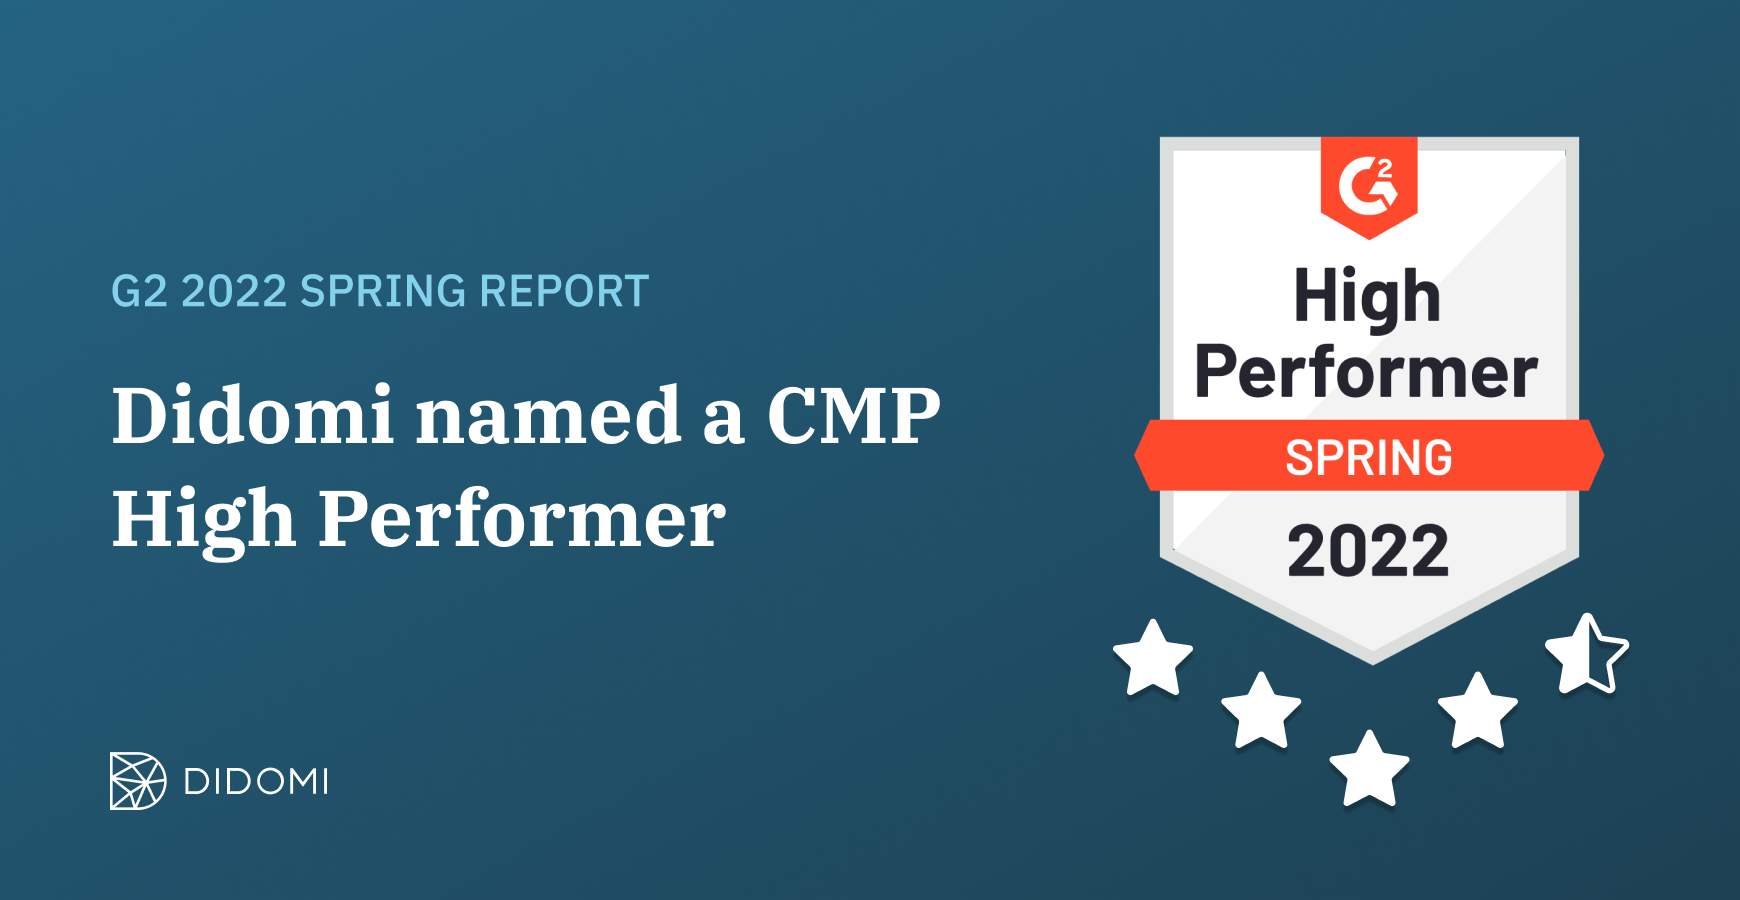 Didomi named as a CMP High Performer in G2 2022 Spring Report